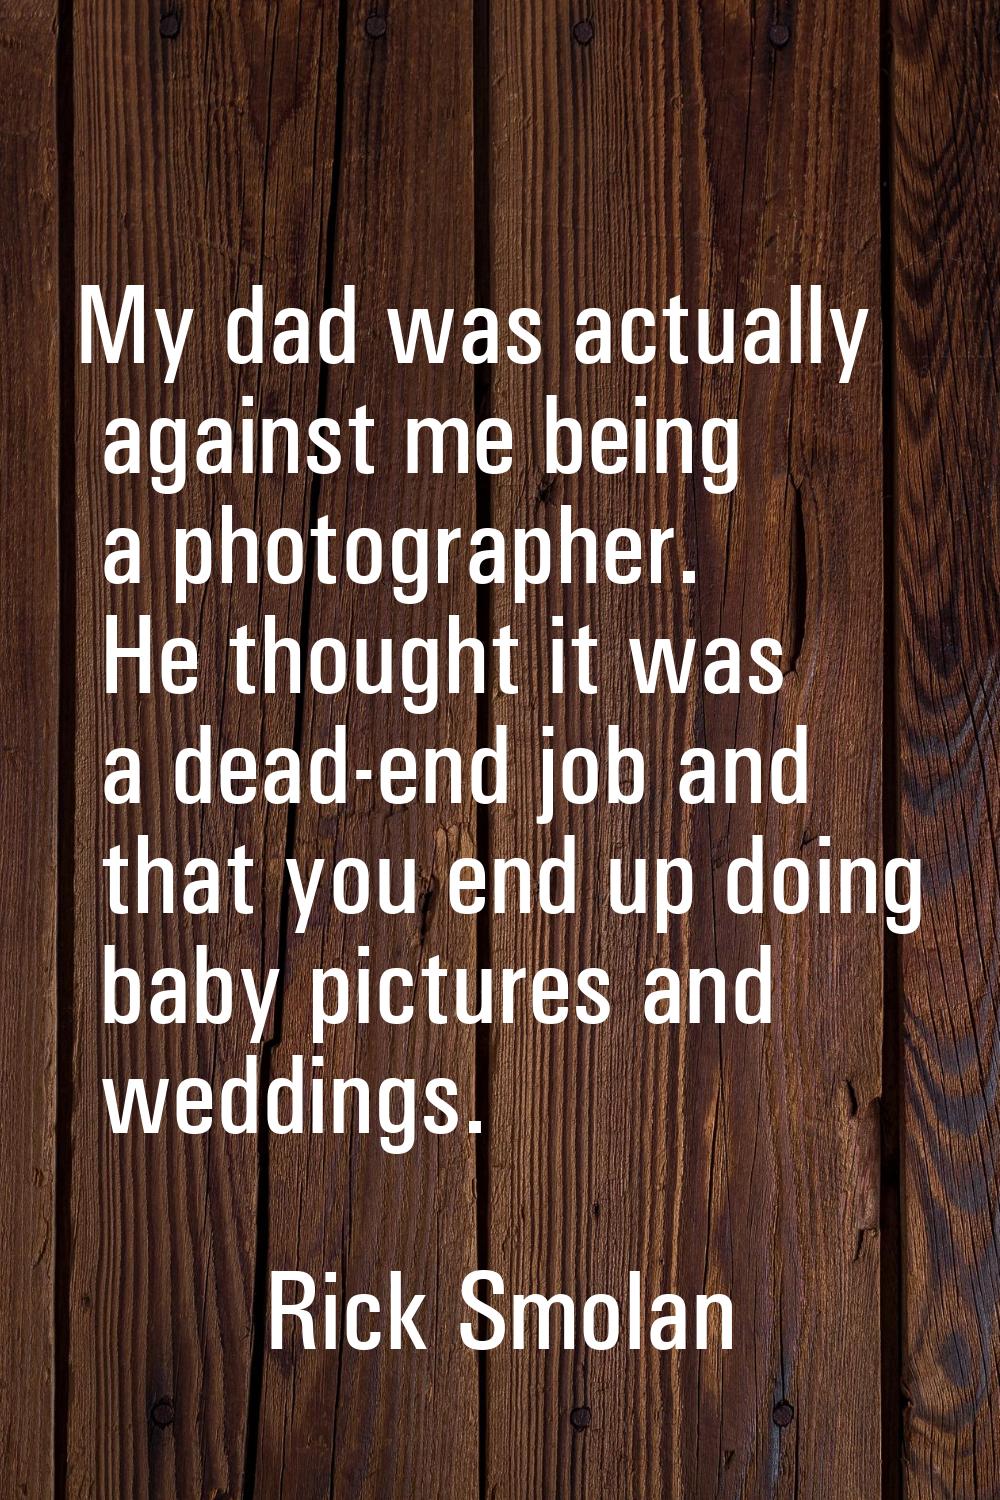 My dad was actually against me being a photographer. He thought it was a dead-end job and that you 